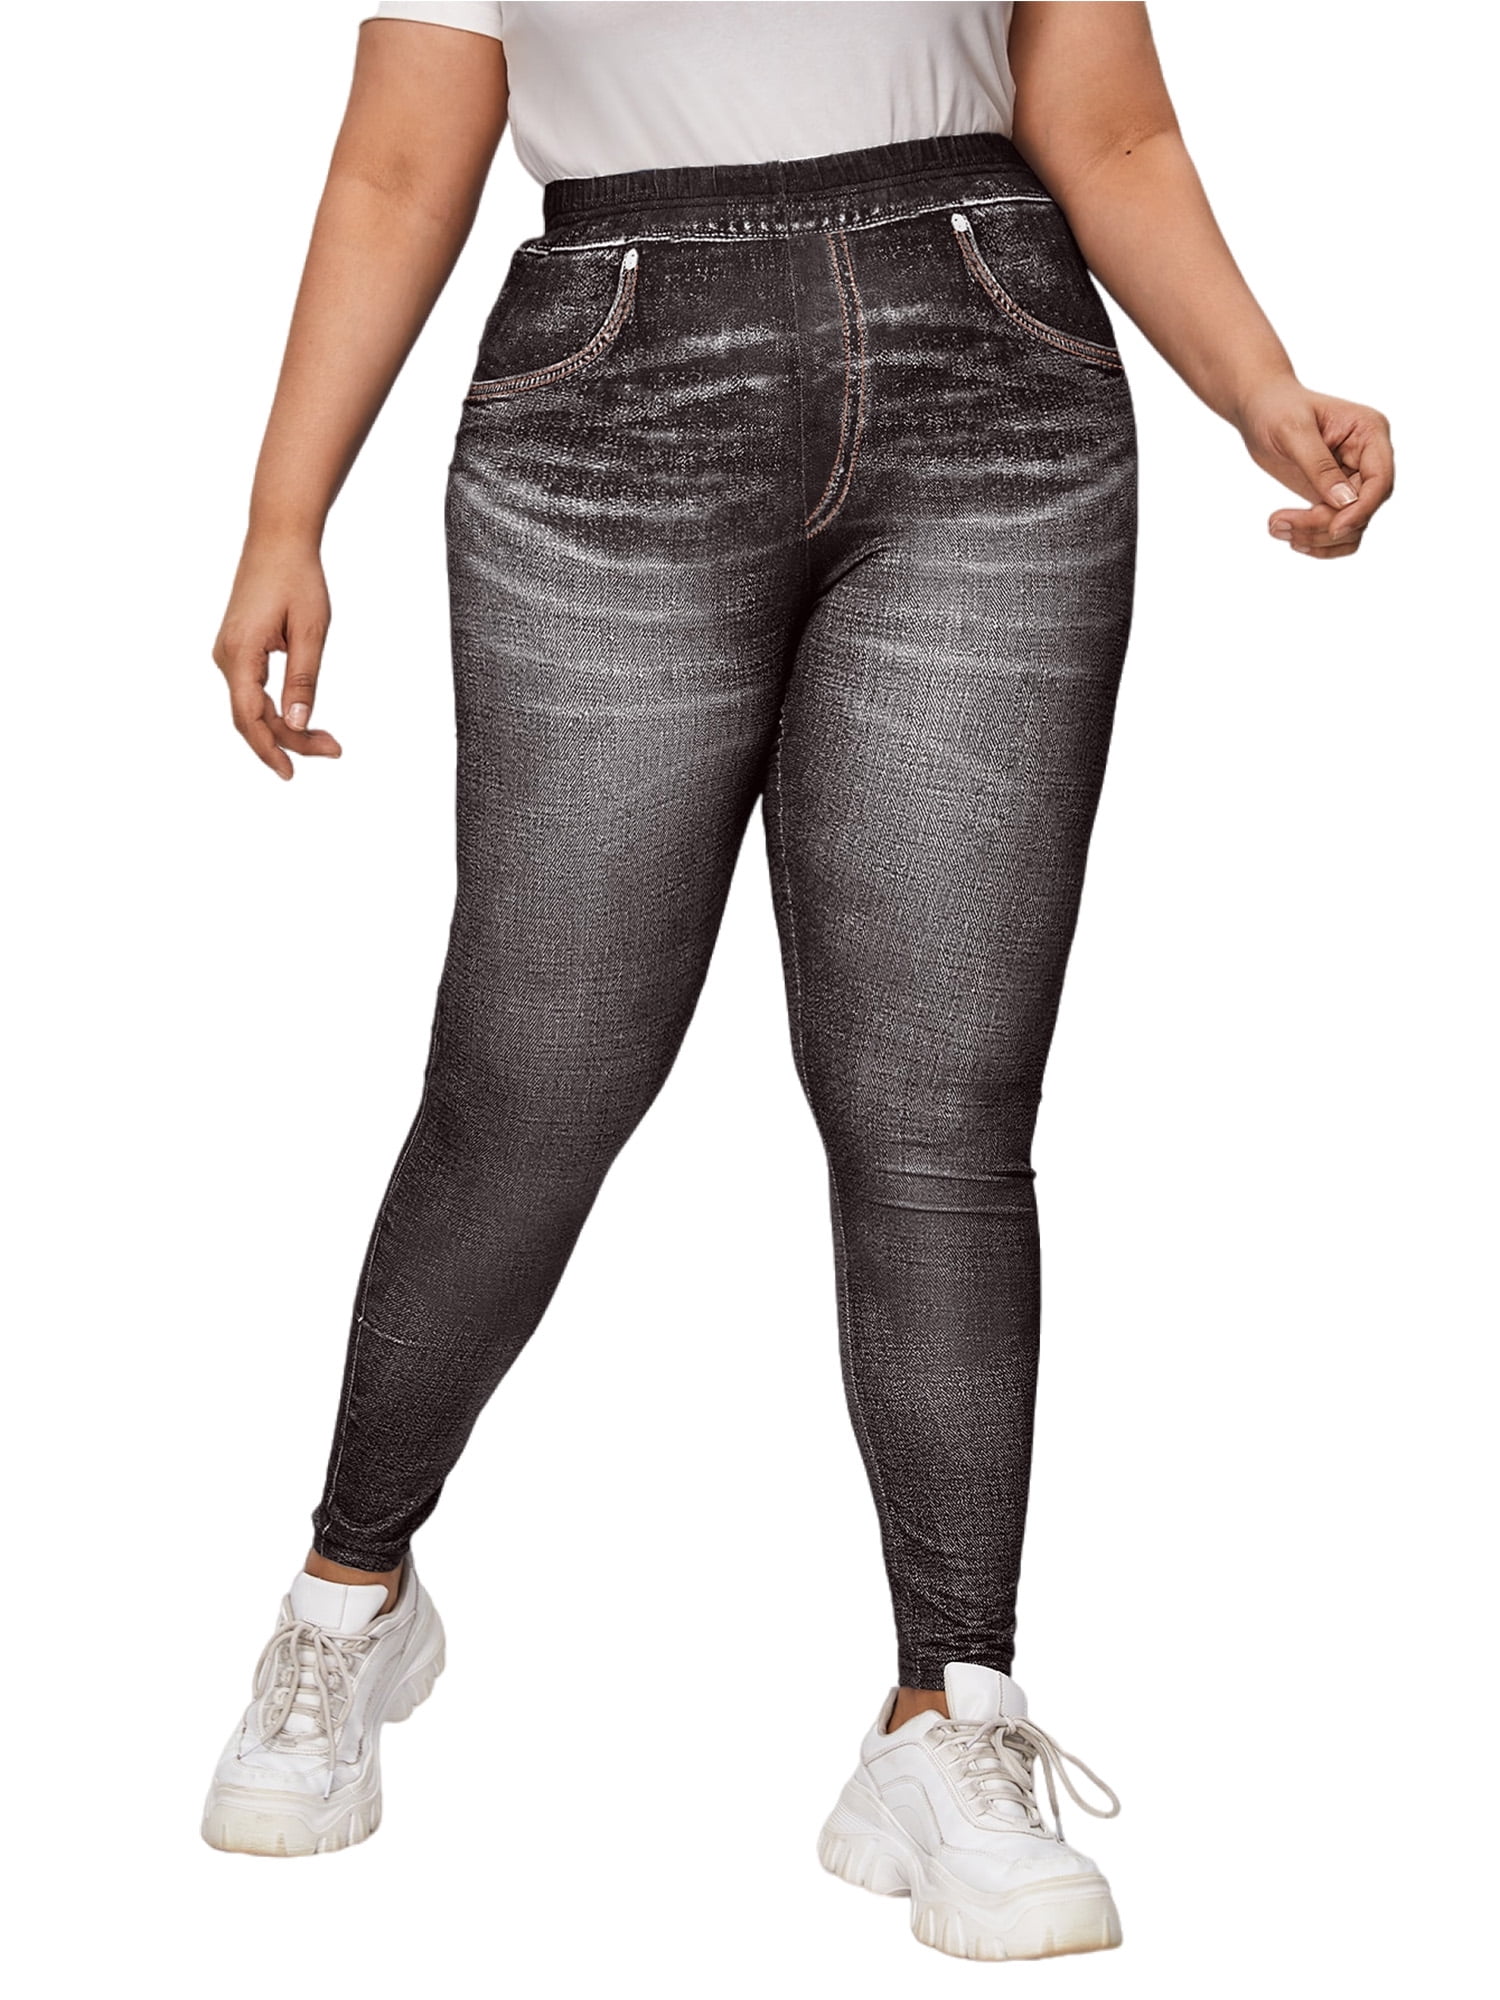 Frontwalk Women Oversized Faux Denim Pant Tummy Control Plus Size Leggings High Waist Fake Jeans Running Tight Bottoms Look Printed Pencil Pants Styl aa1100b4 095e 4386 8a19 23e9883c0abc.fe1f7b6cf8746f260f03e419e4c3027e